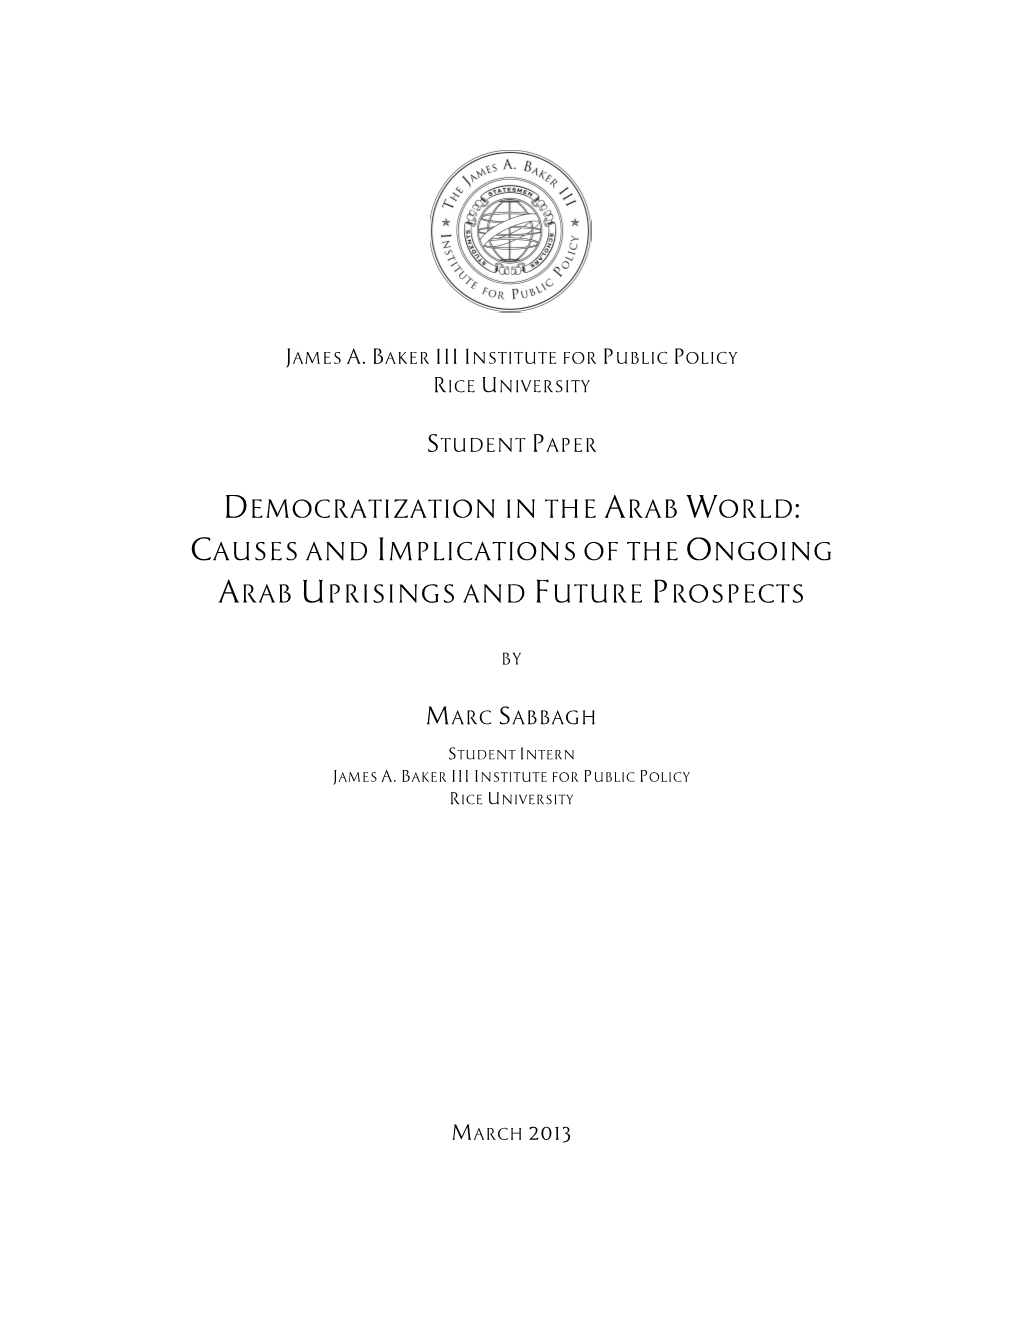 Democratization in the Arab World: Causes and Implications of the Ongoing Arab Uprisings and Future Prospects